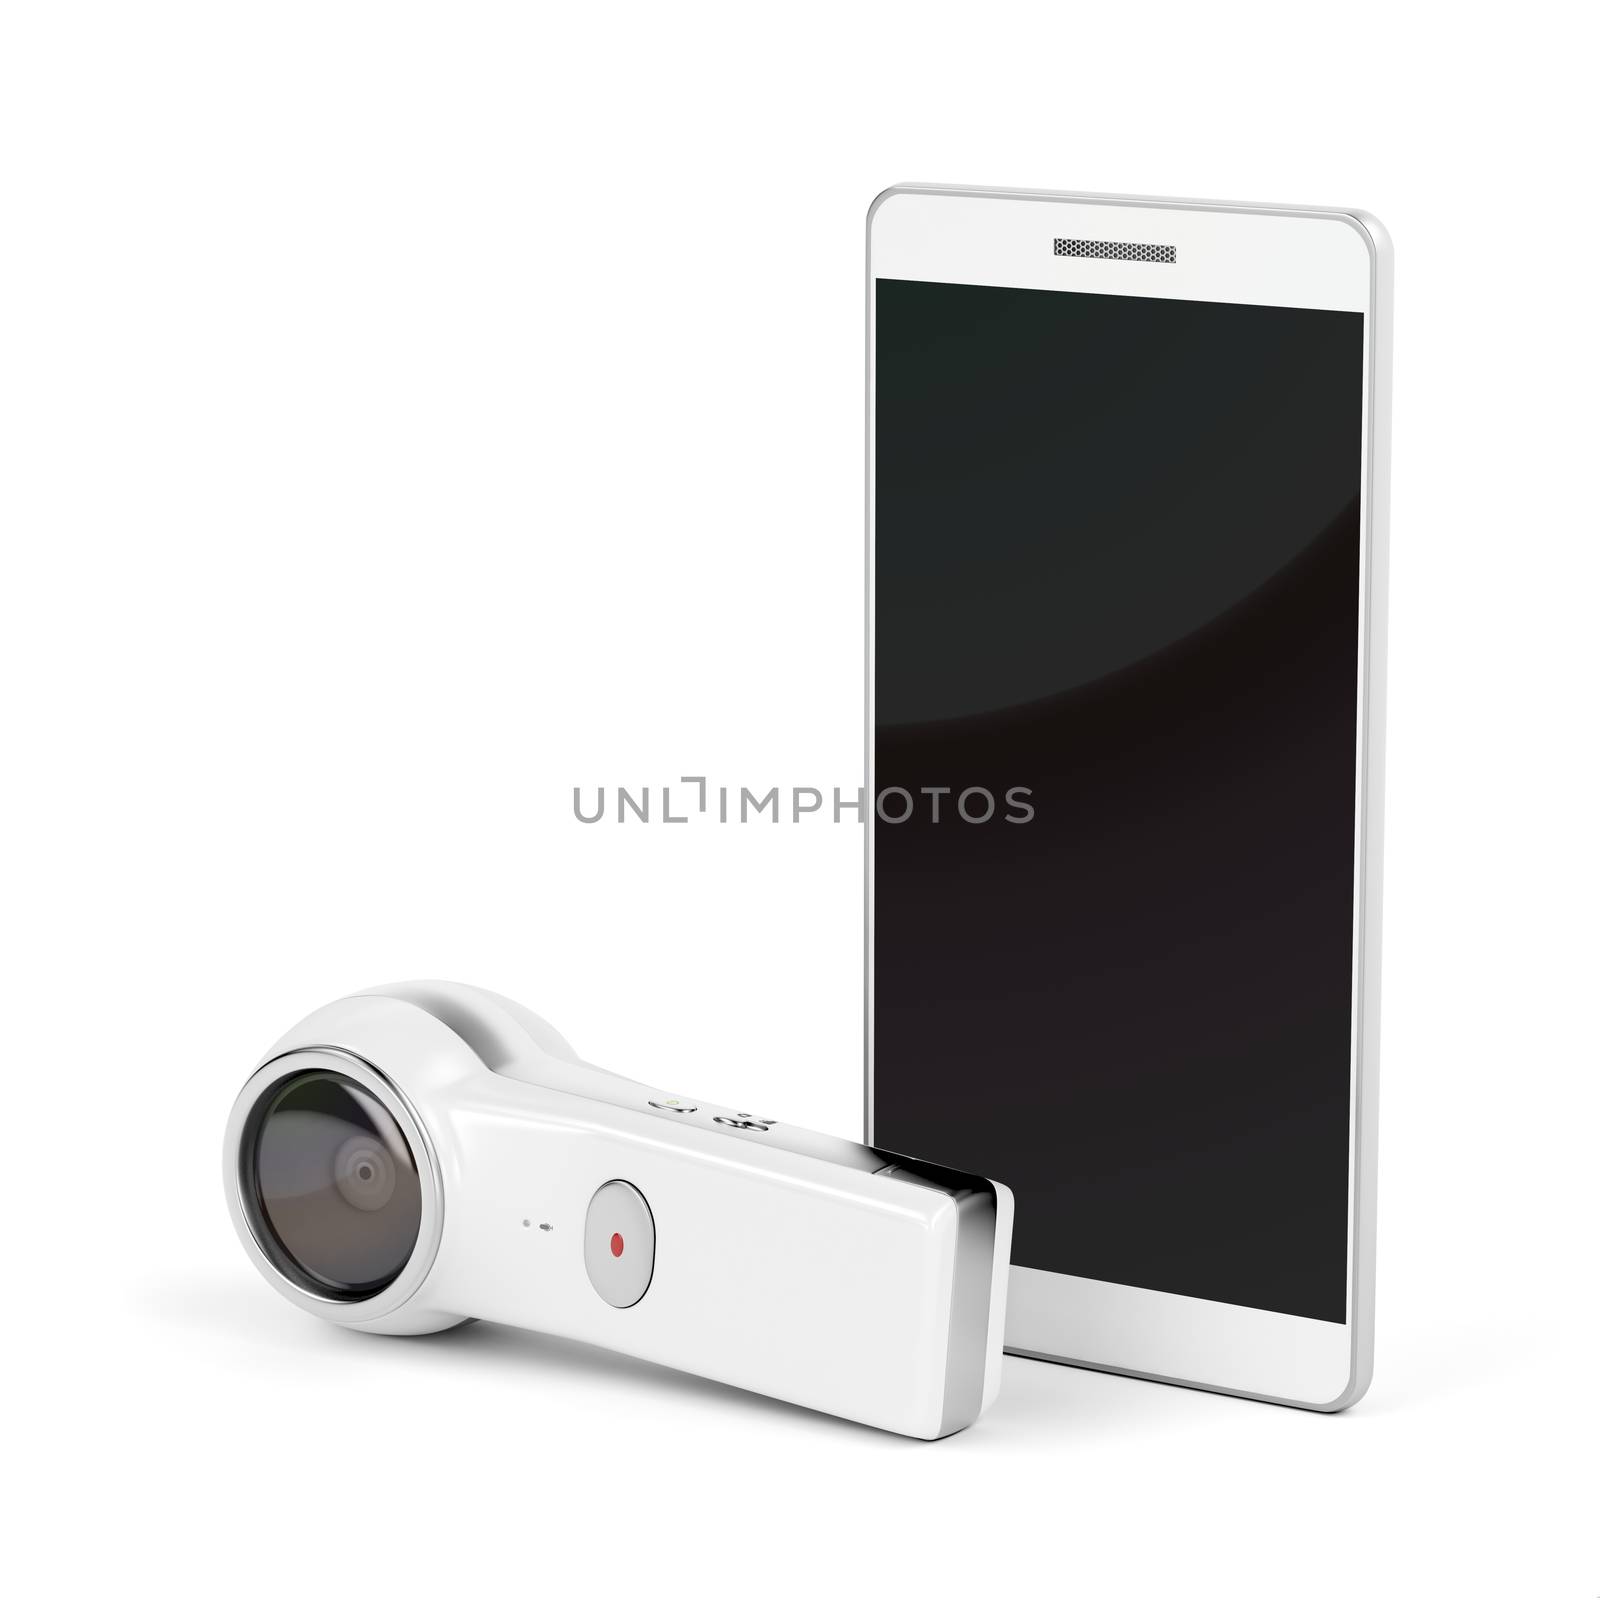 360 degree camera and smartphone by magraphics